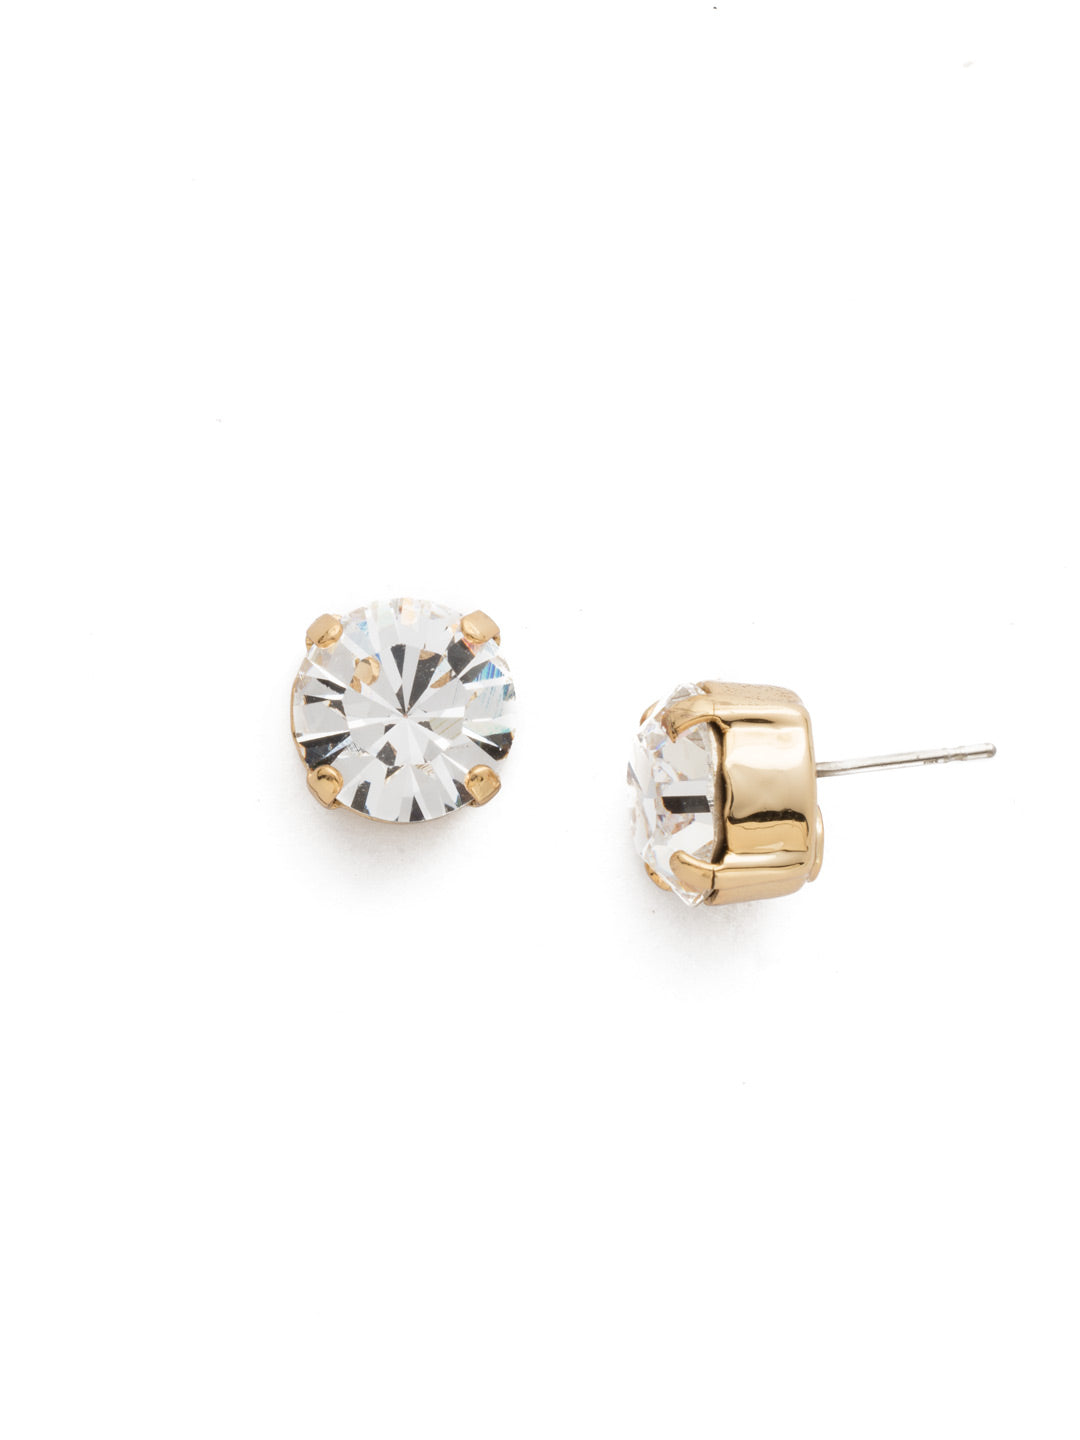 London Stud Earrings - ECM14BGCRY - <p>Everyone needs a great pair of studs. Add some classic sparkle to any occasion with these stud earrings. Need help picking a stud? <a href="https://www.sorrelli.com/blogs/sisterhood/round-stud-earrings-101-a-rundown-of-sizes-styles-and-sparkle">Check out our size guide!</a> From Sorrelli's Crystal collection in our Bright Gold-tone finish.</p>